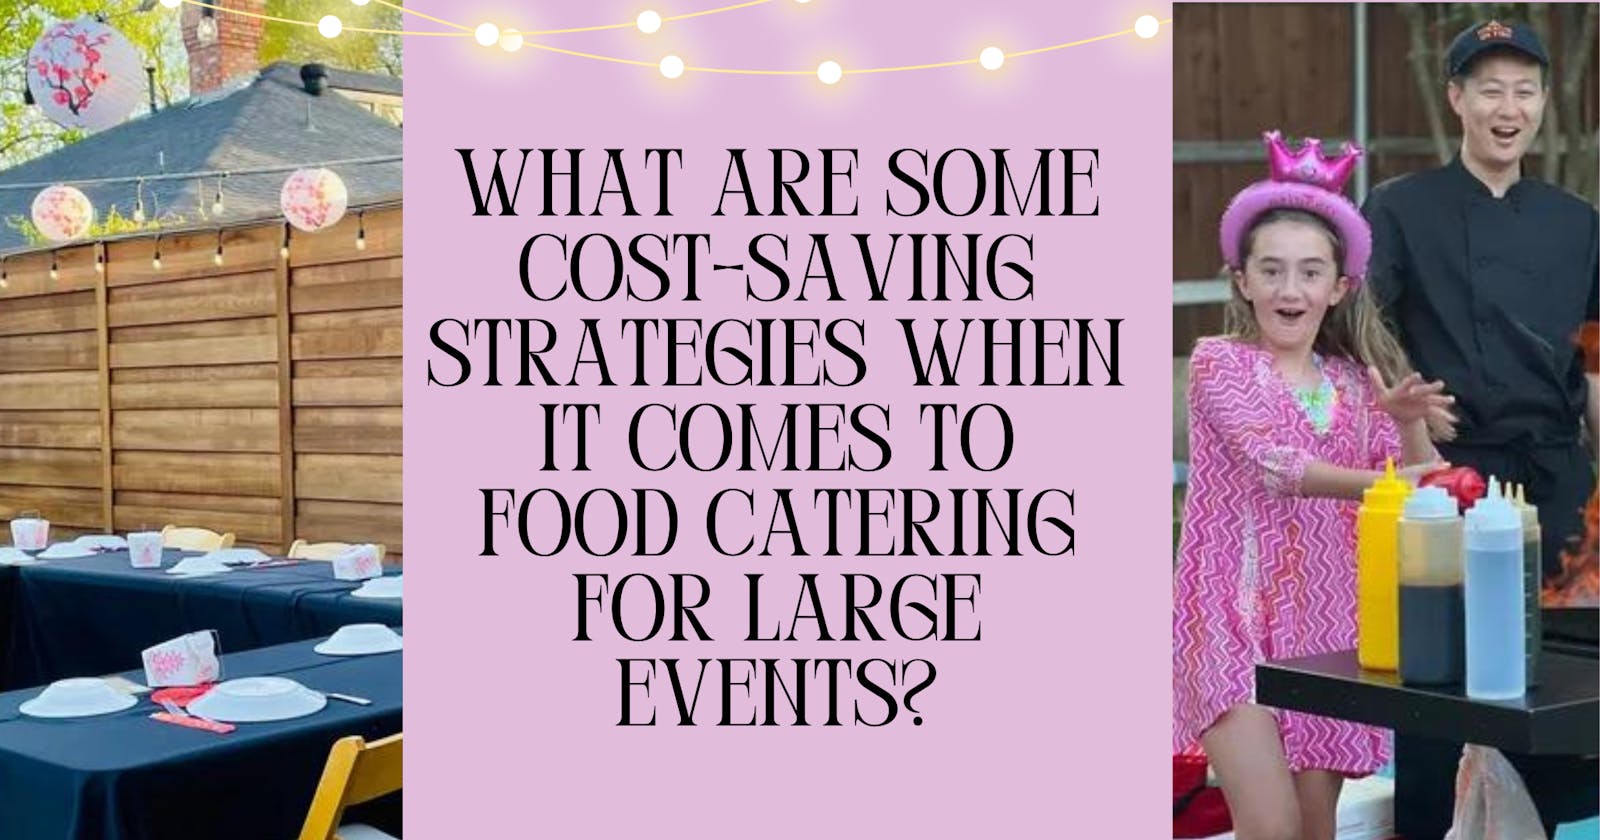 What Are Some Cost-Saving Strategies When It Comes To Food Catering For Large Events?